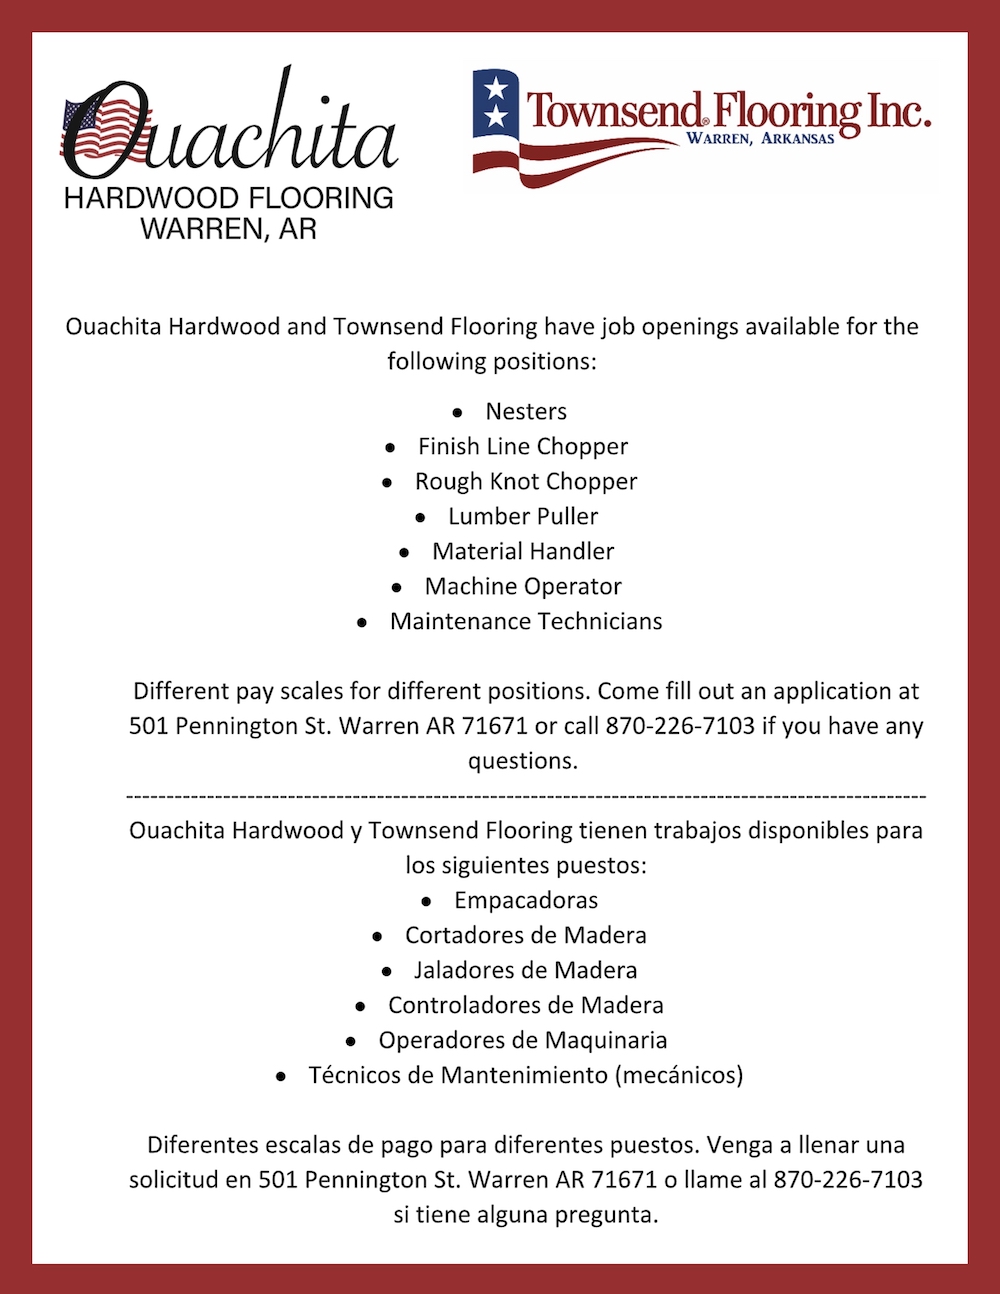 Ouachita Hardwood and Townsend Flooring have job openings